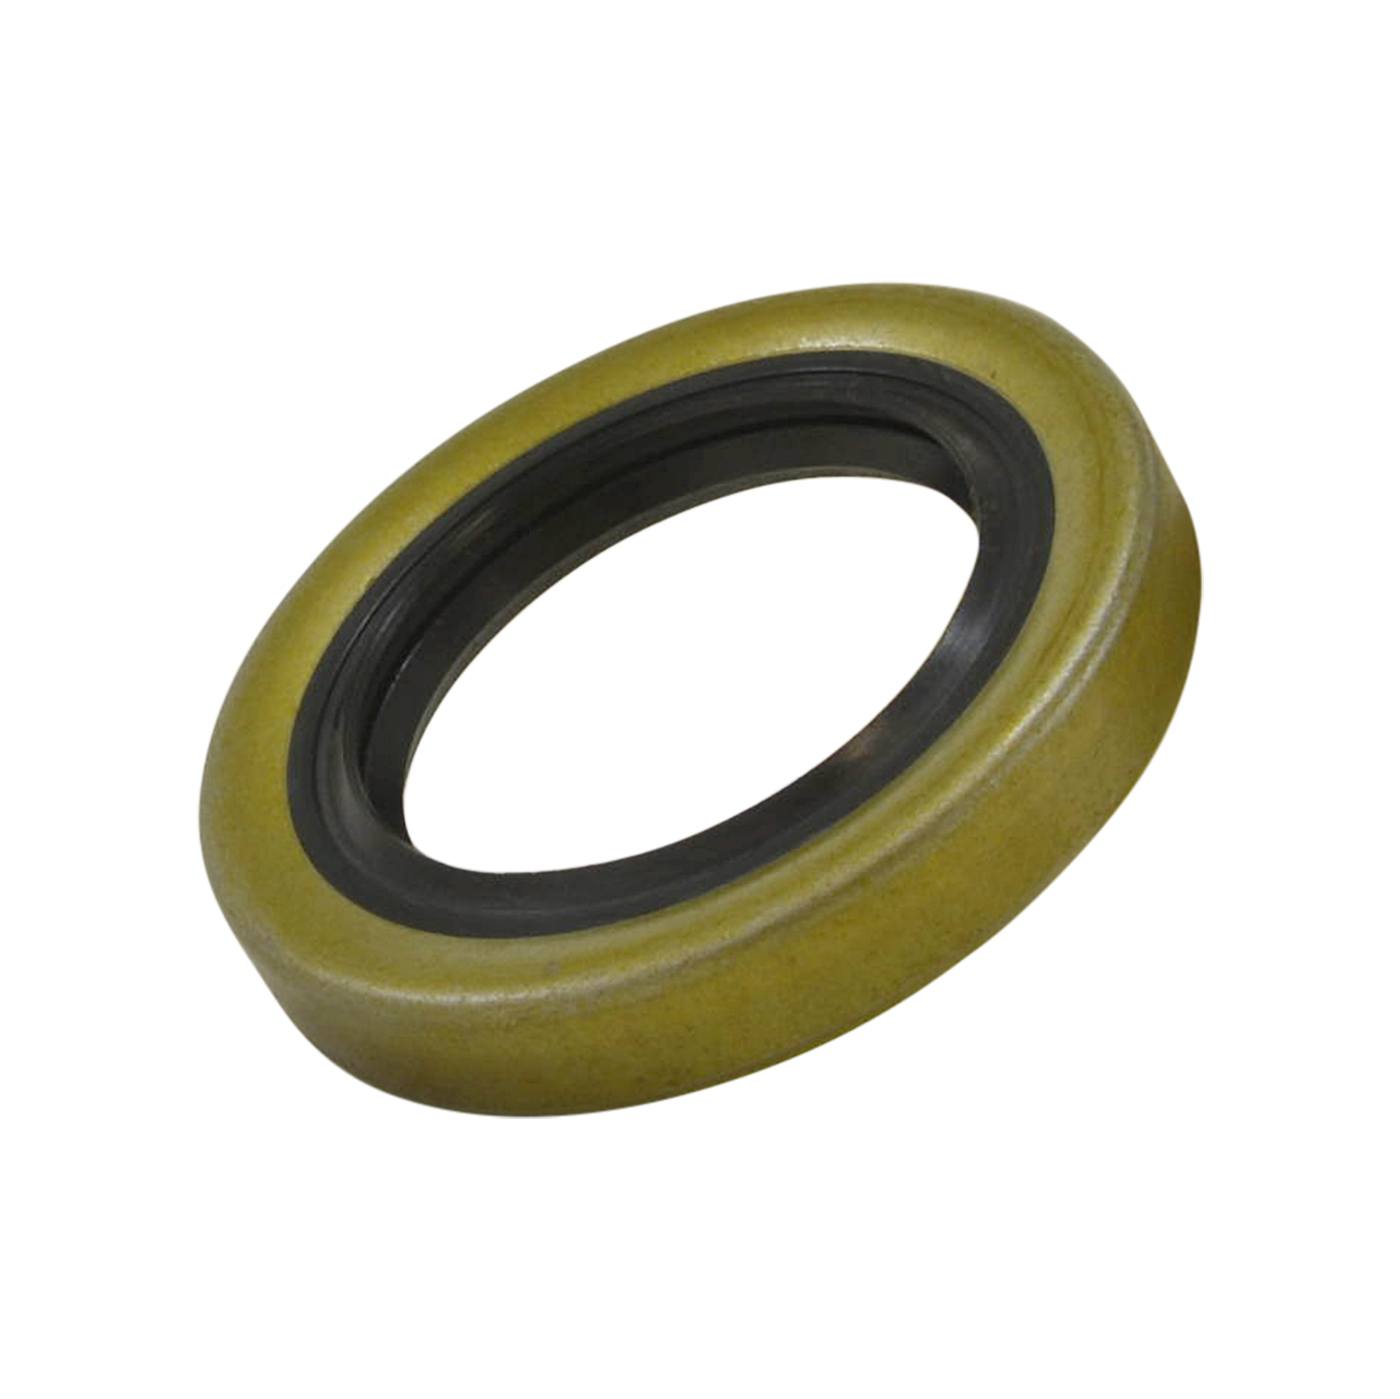 Replacement outyer seal for Dana 30 Bronco and CI Vette side seal. 